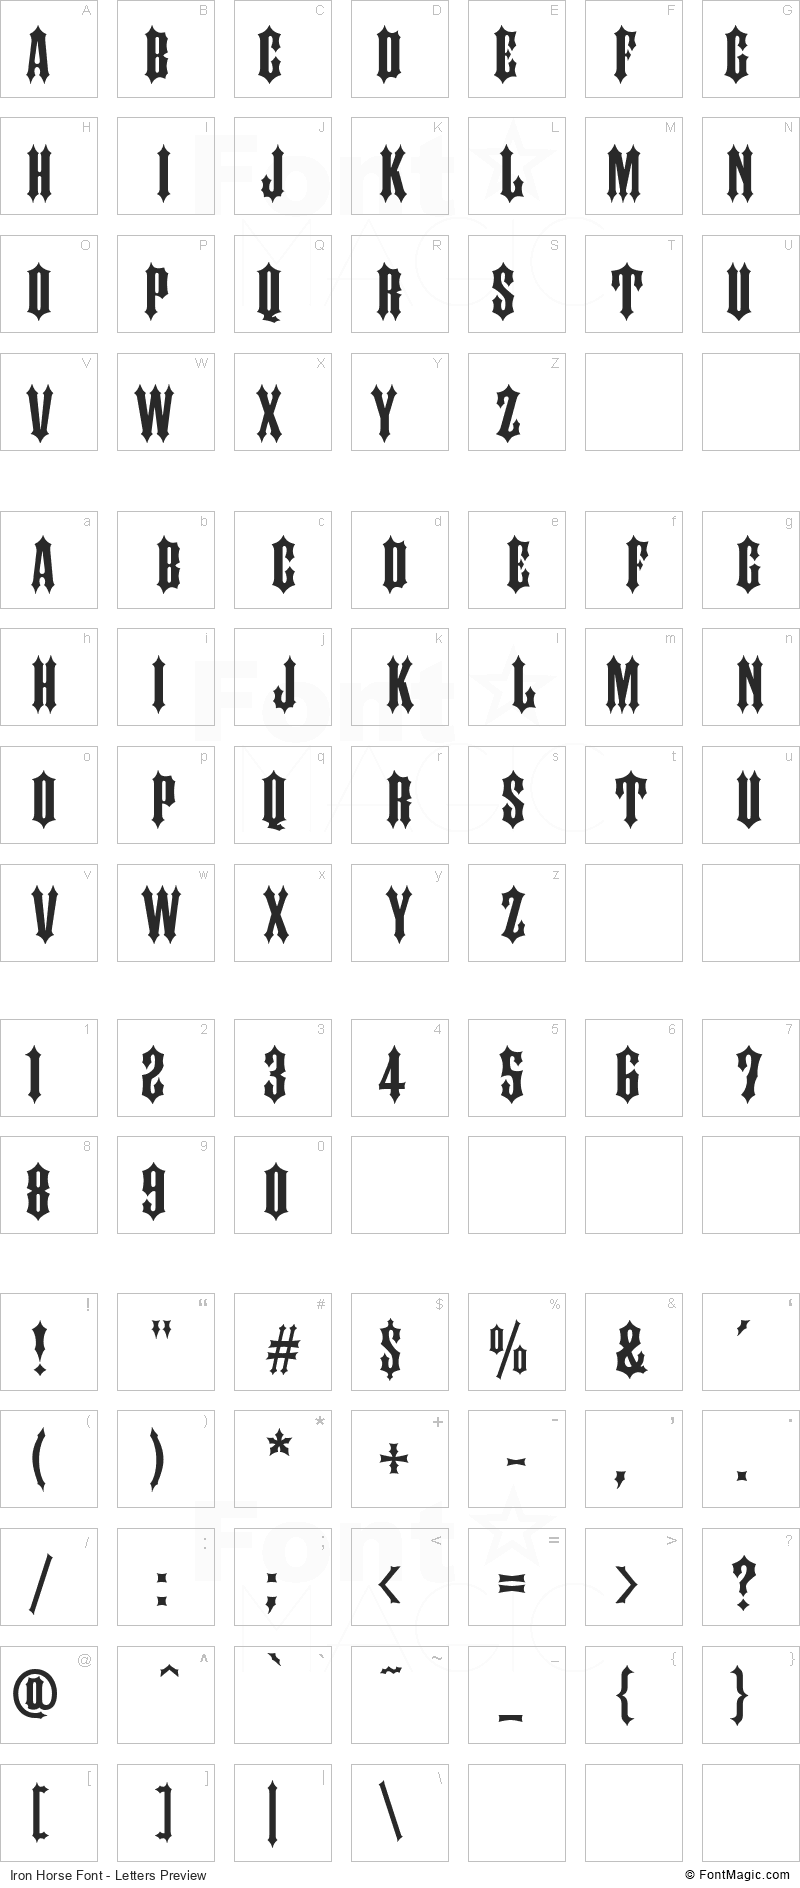 Iron Horse Font - All Latters Preview Chart